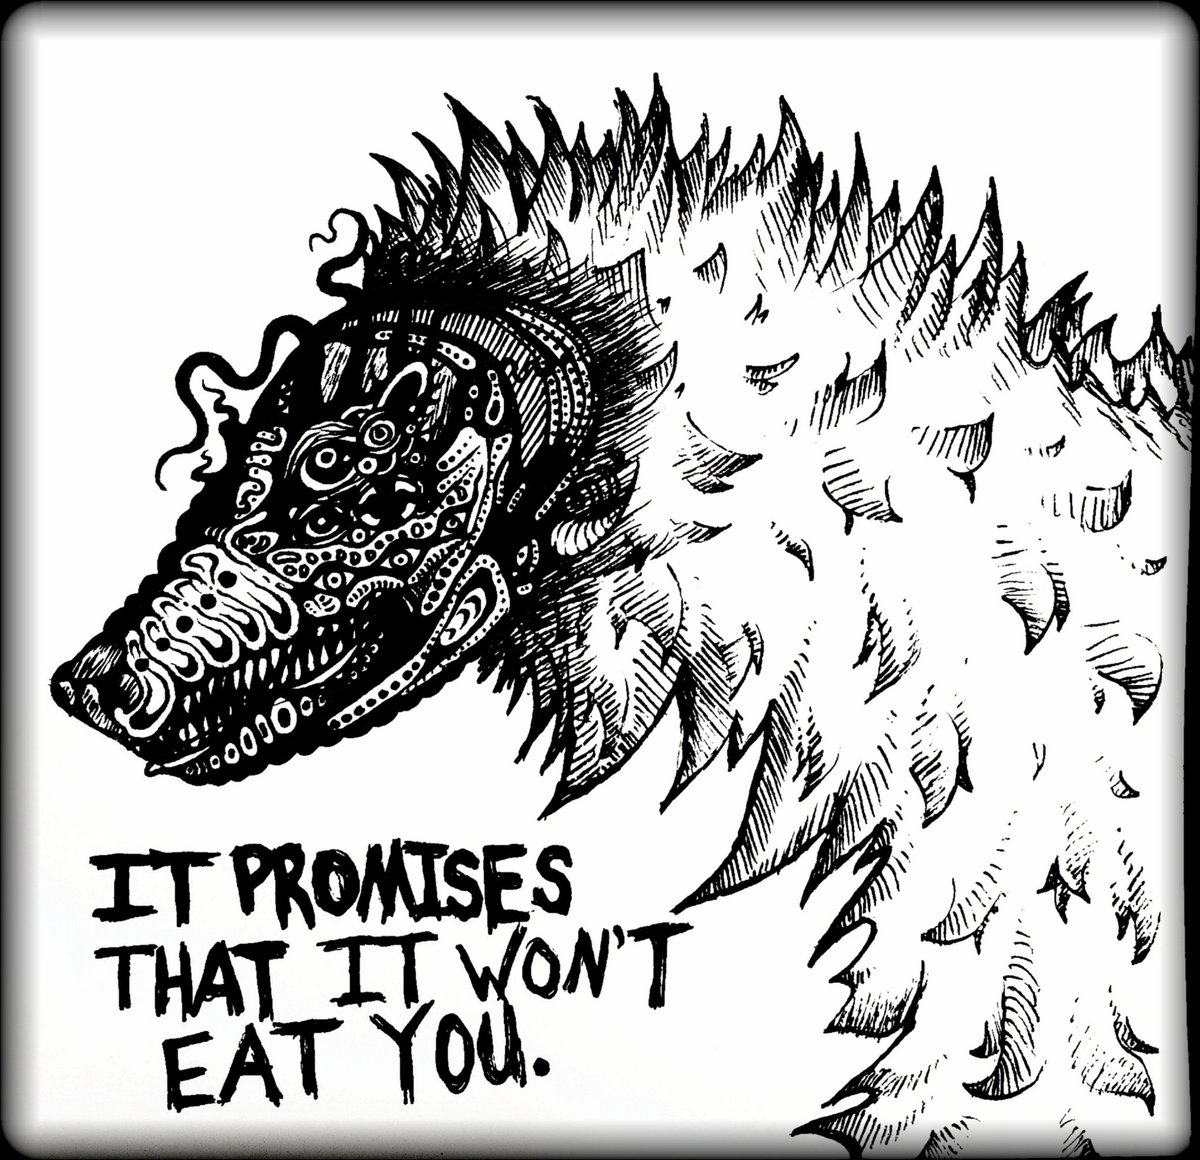 RT @null_creature: IT PROMISES THAT IT WONT EAT YOU.

--TRUST?--
      [YES]
   >[YES]
      [YES] https://t.co/xAJxqiWDUQ